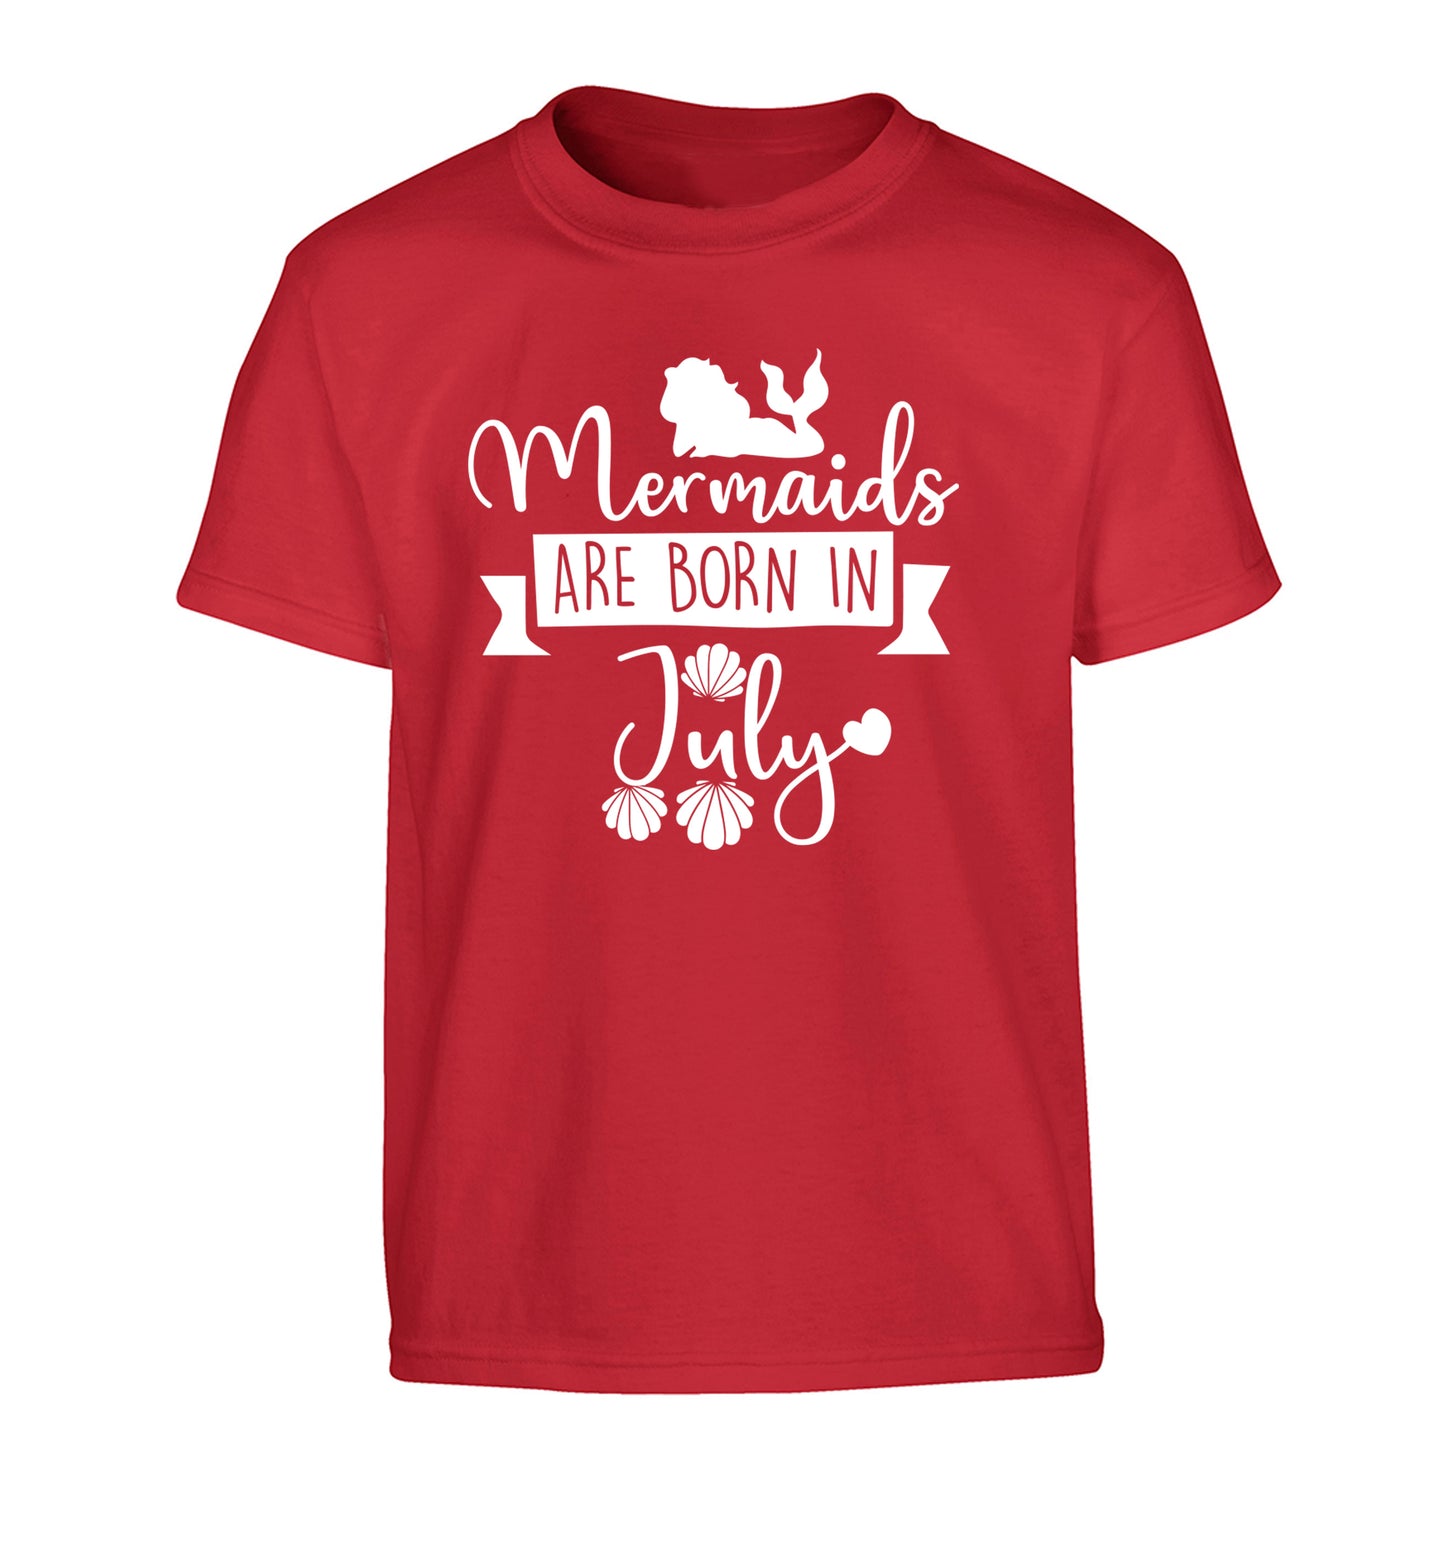 Mermaids are born in July Children's red Tshirt 12-13 Years